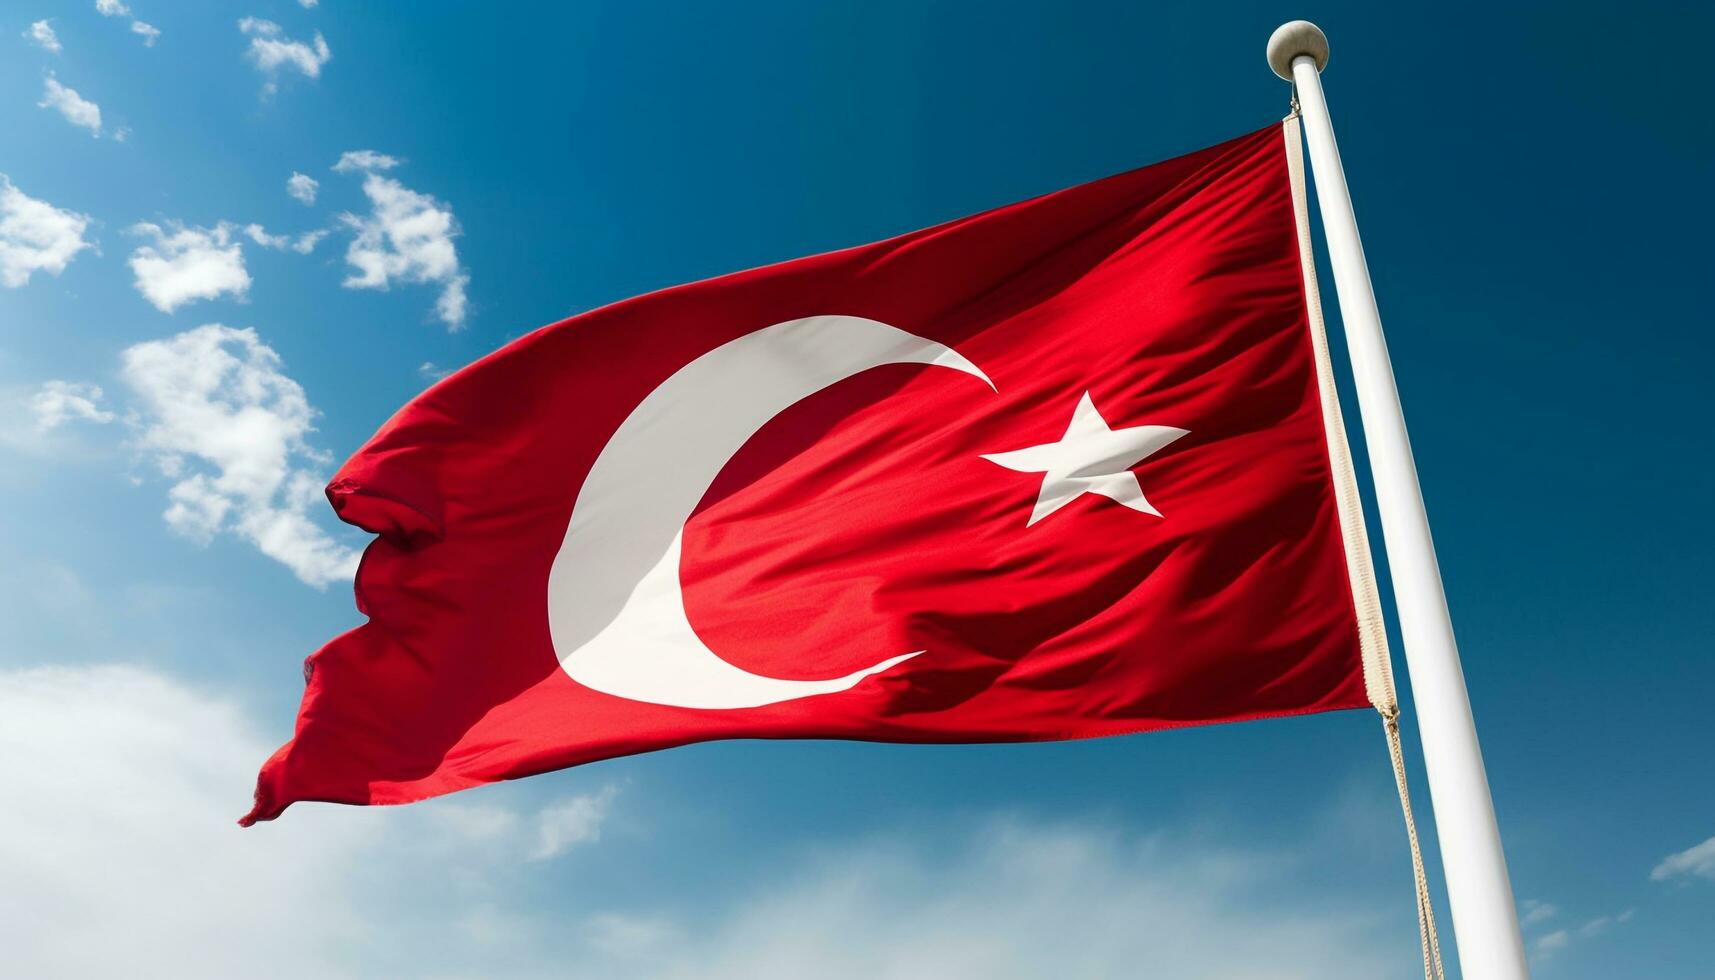 Turkish flag flying high, waving with pride in the wind generated by AI photo